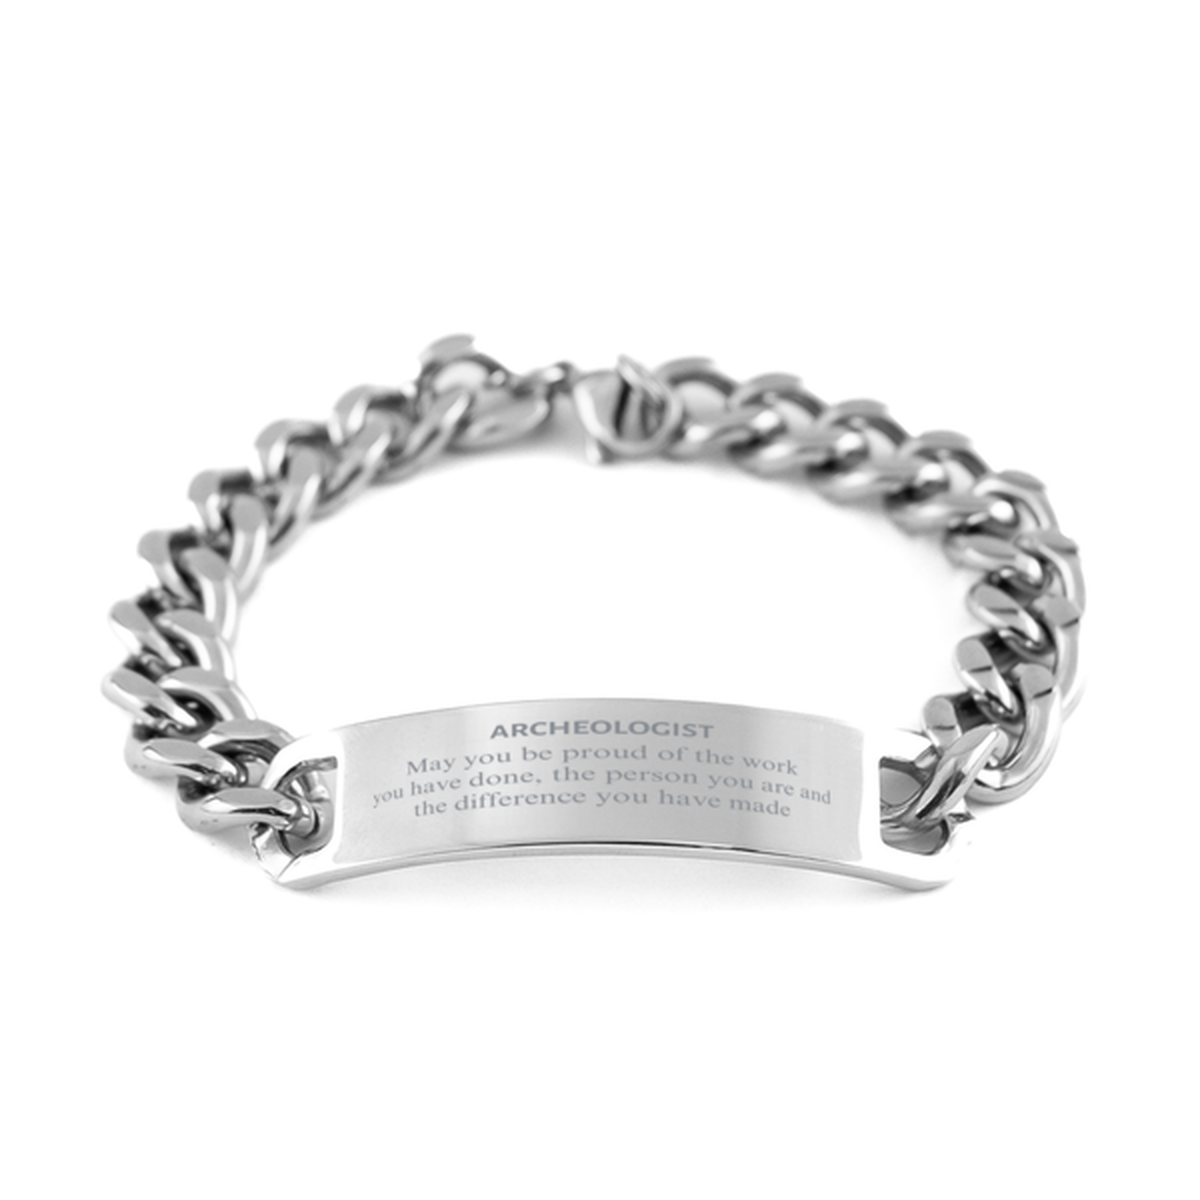 Archeologist May you be proud of the work you have done, Retirement Archeologist Cuban Chain Stainless Steel Bracelet for Colleague Appreciation Gifts Amazing for Archeologist